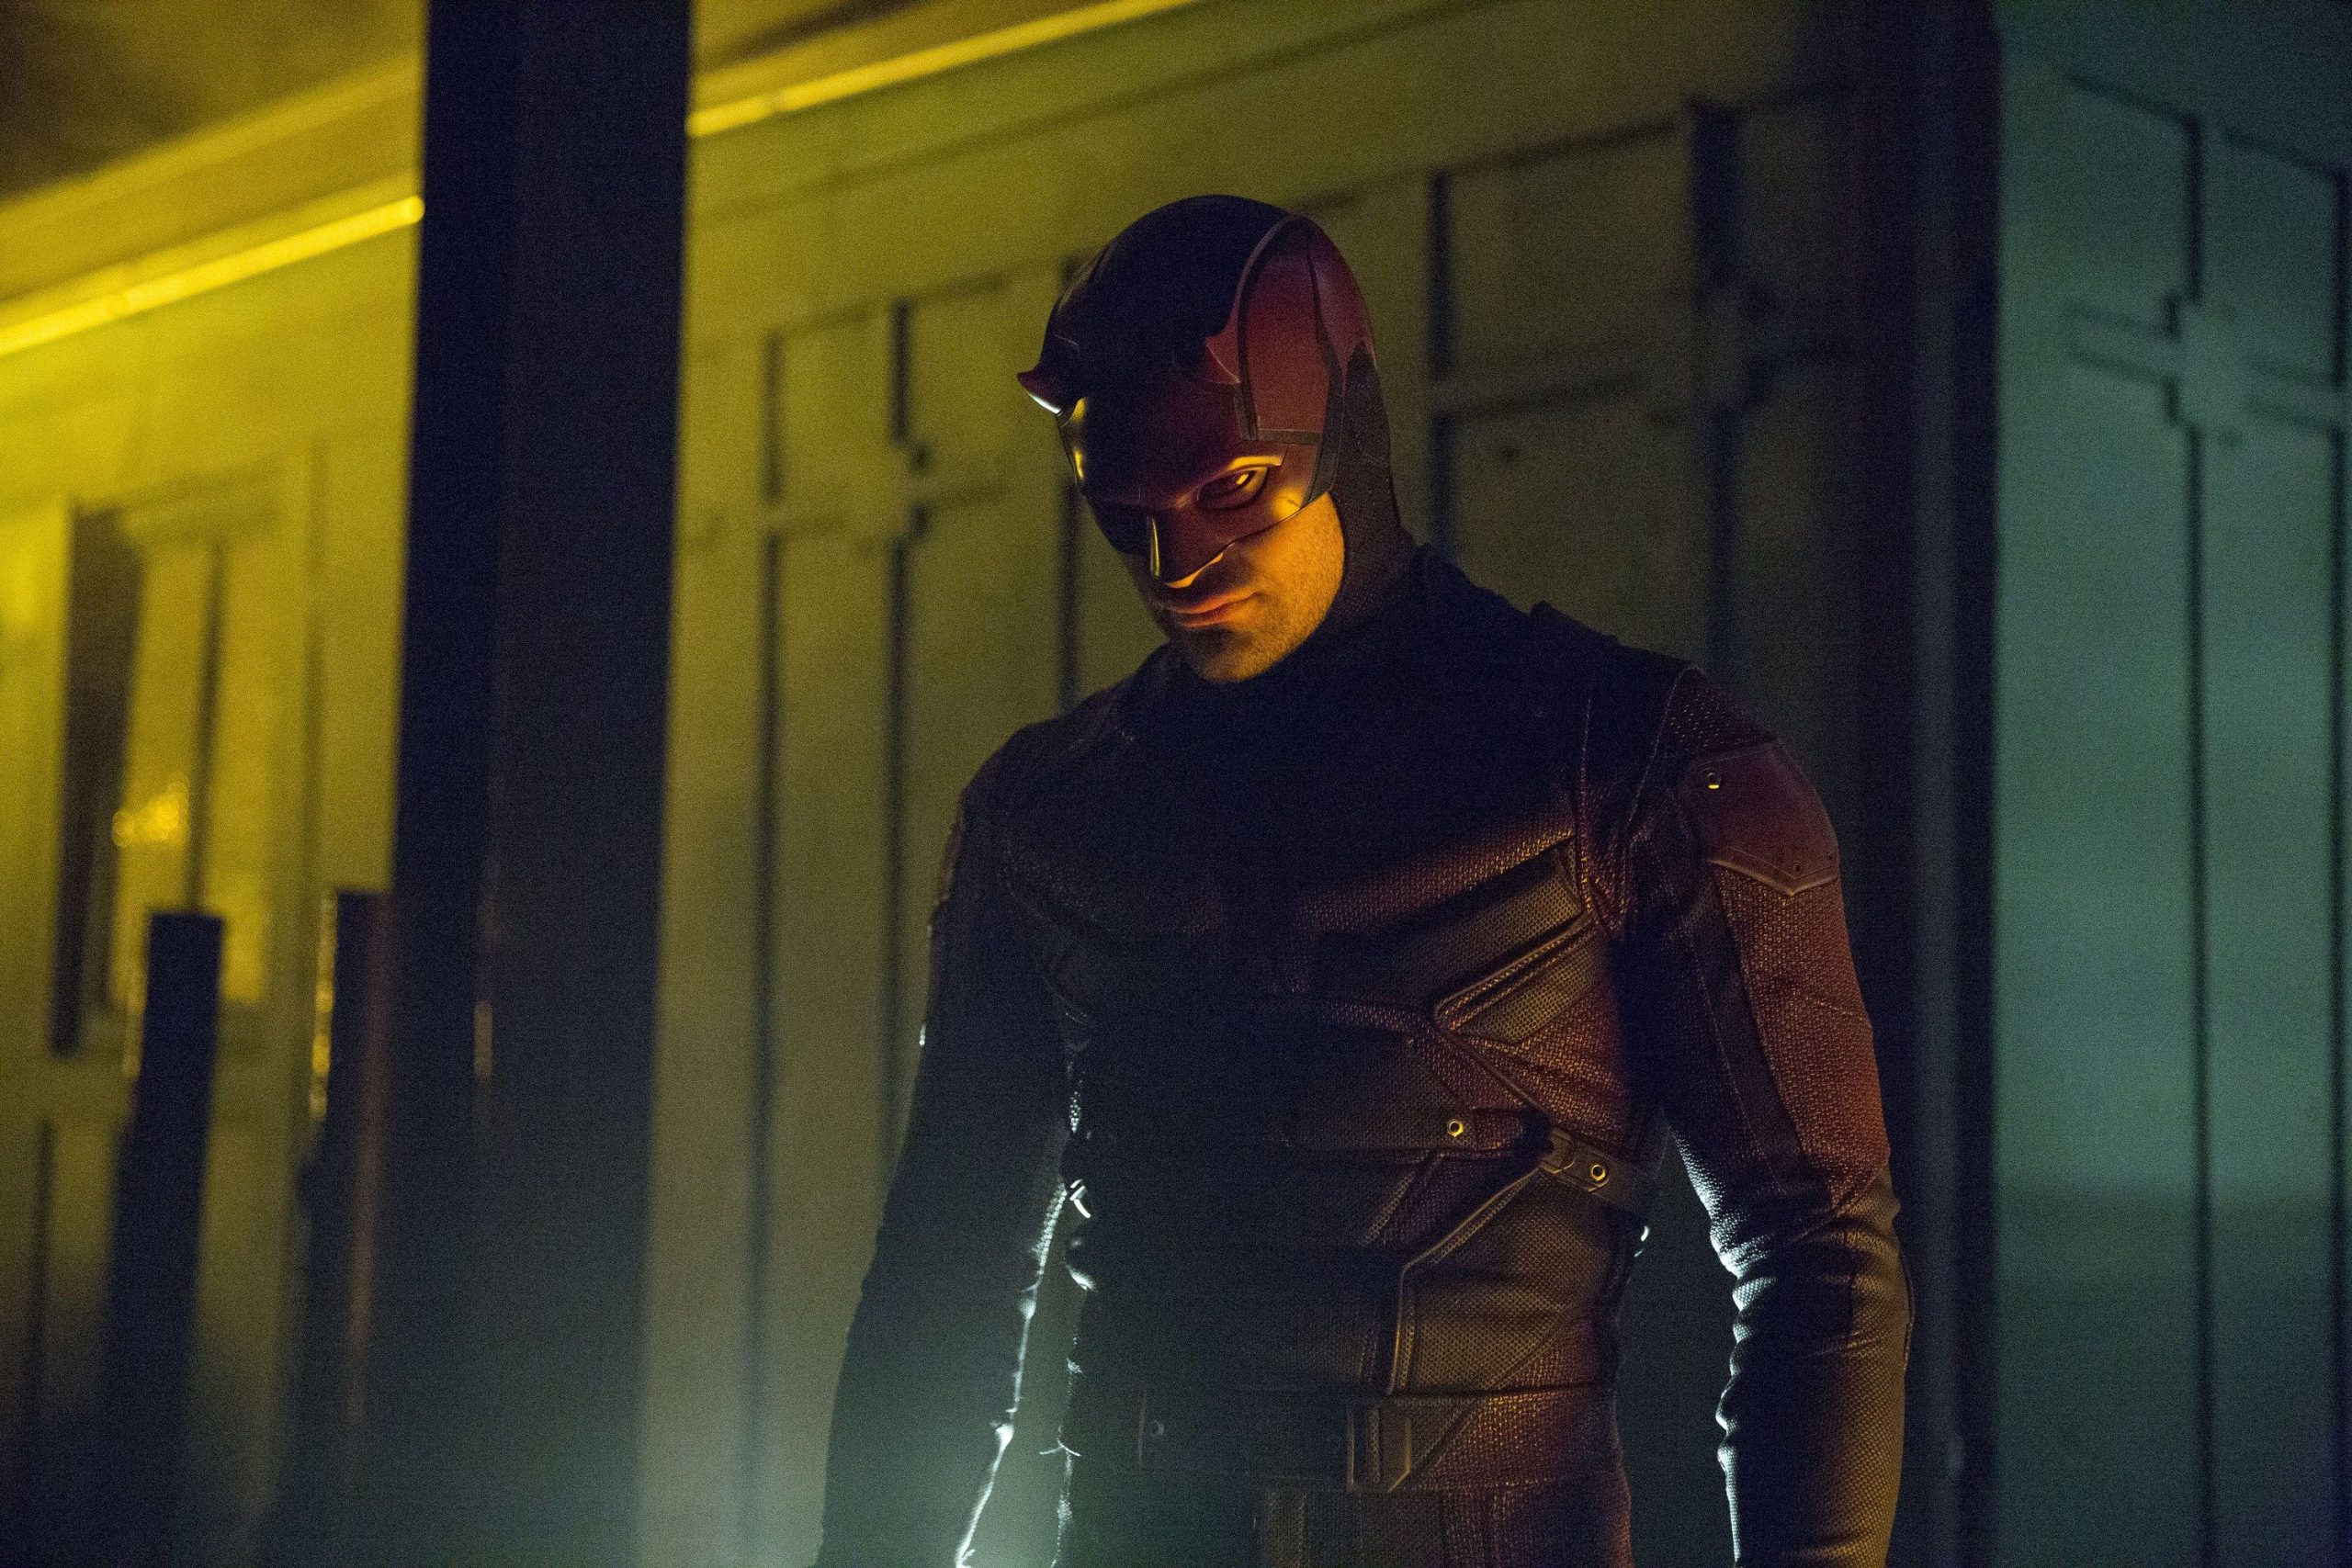 More hints about Daredevil's guest in 